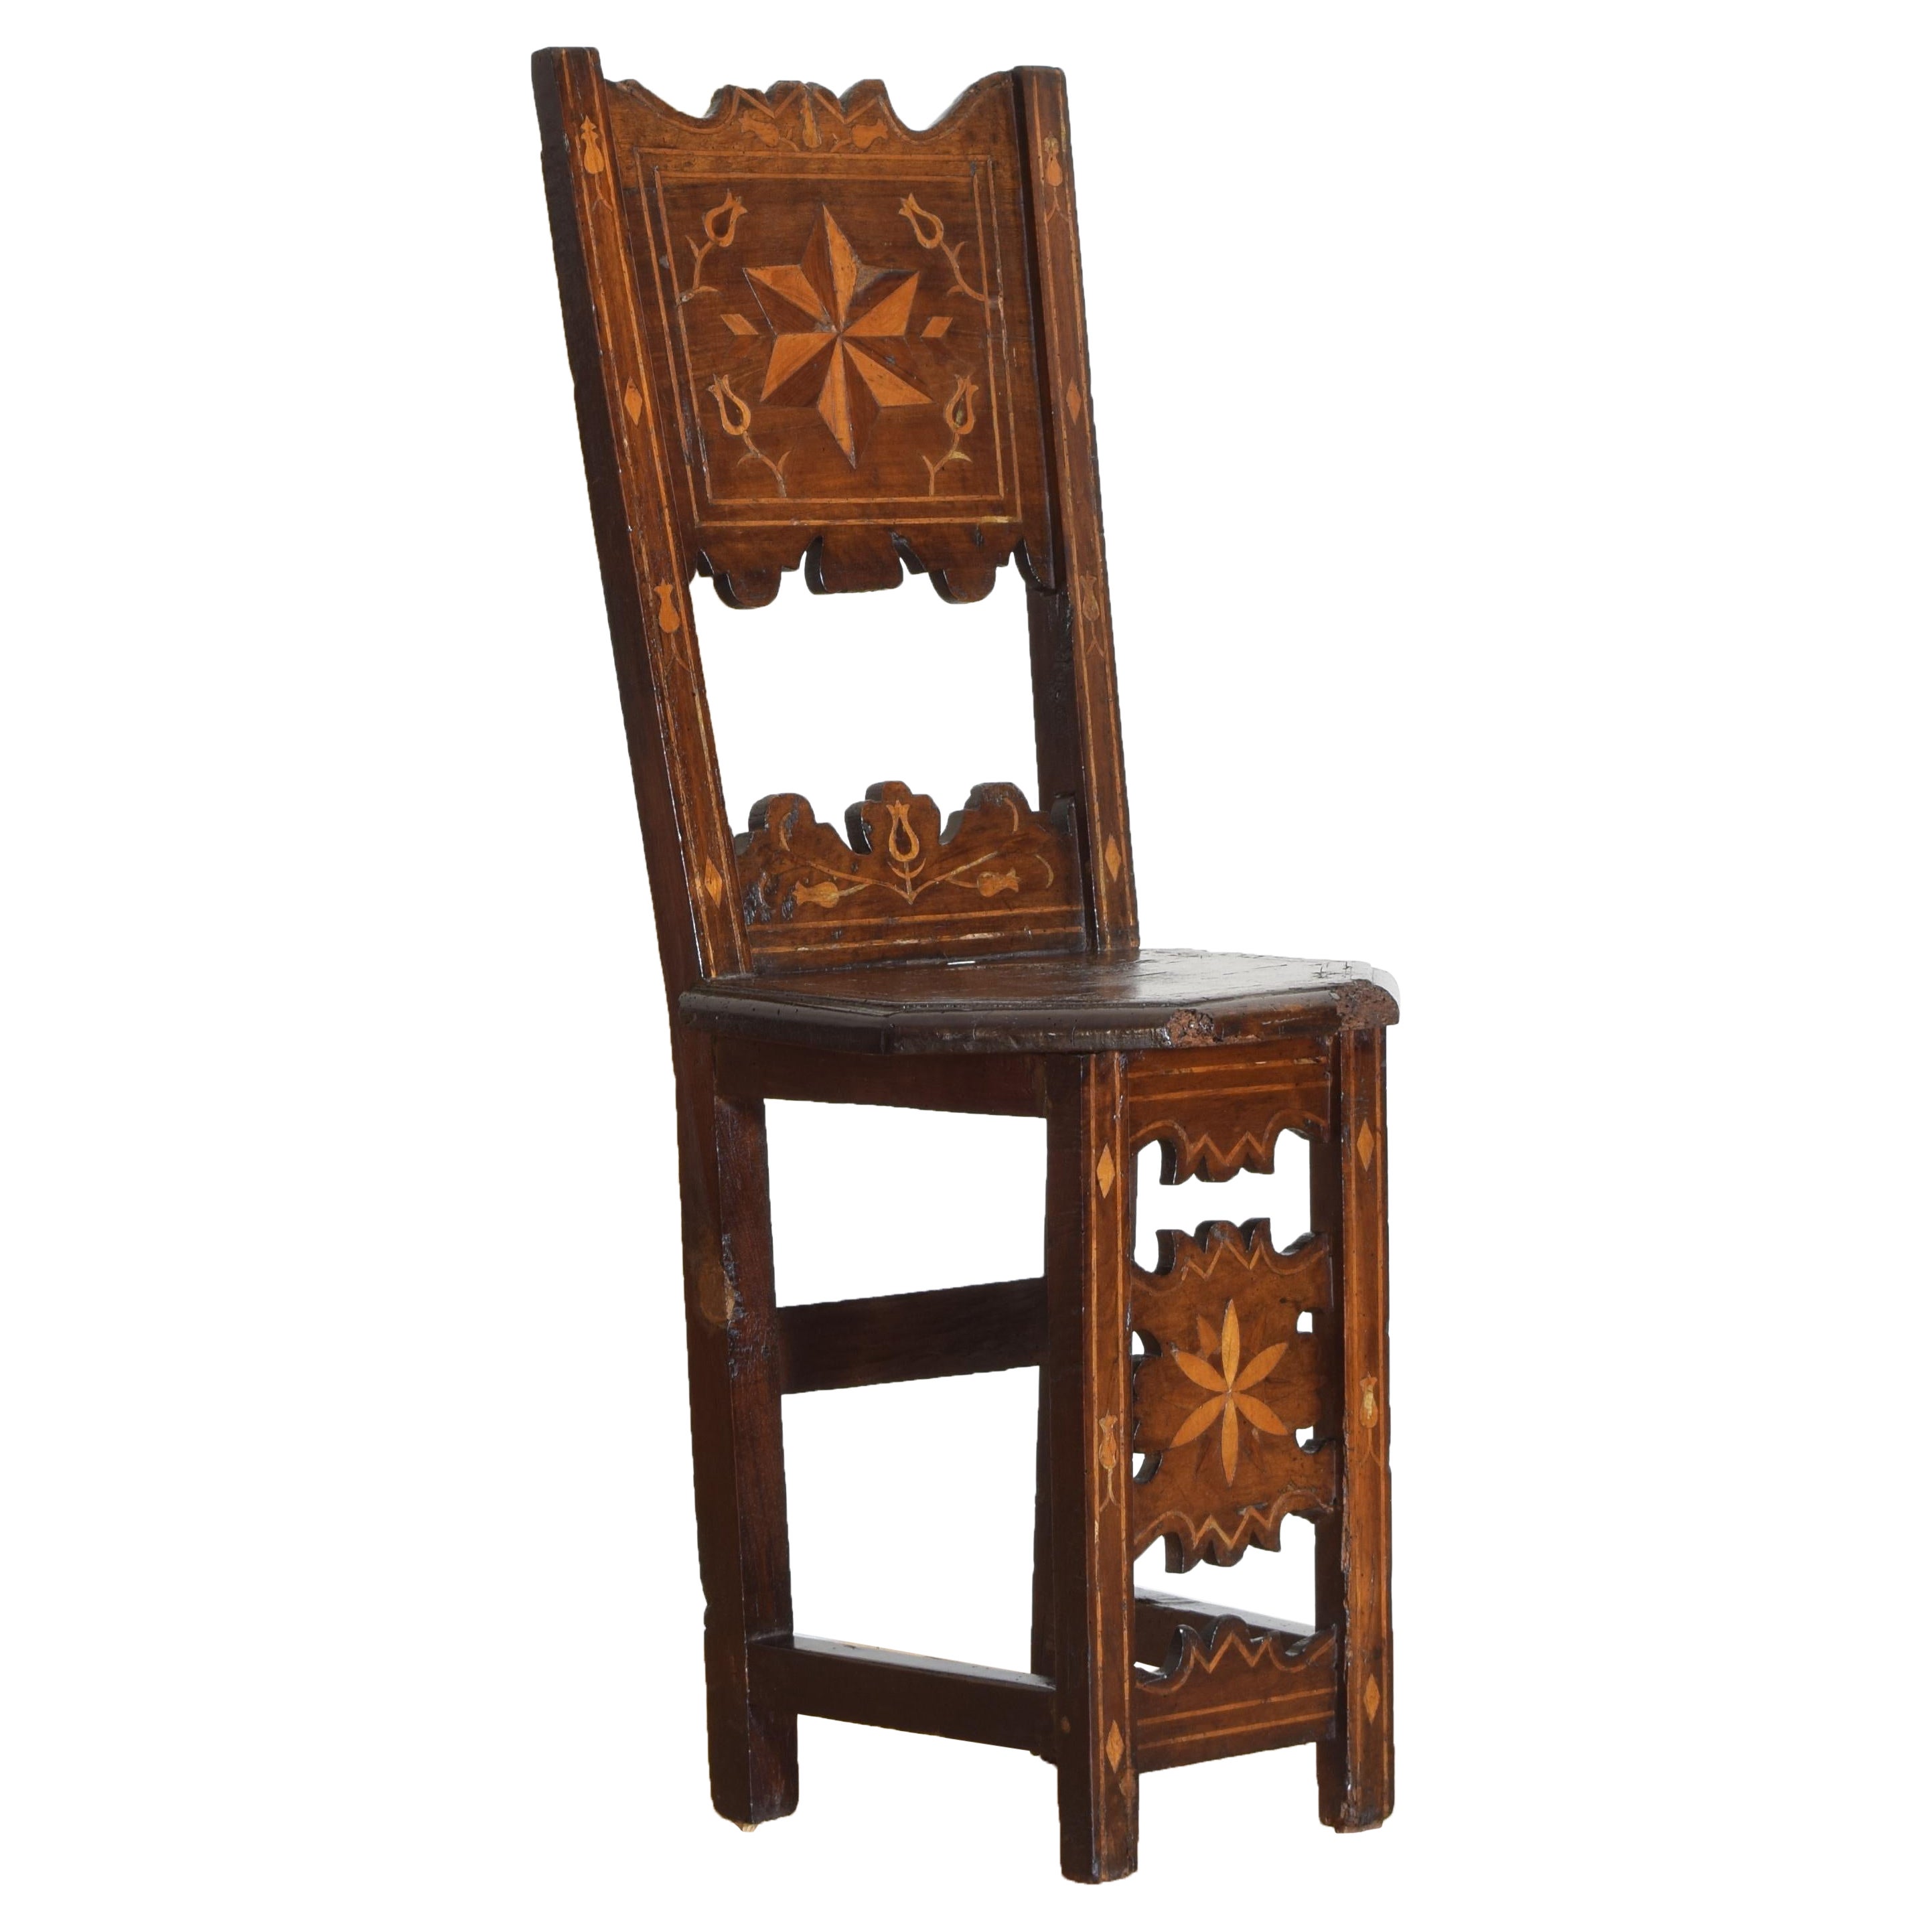 Italian Baroque Walnut and Inlaid Convent Chair, Mid 17th Century